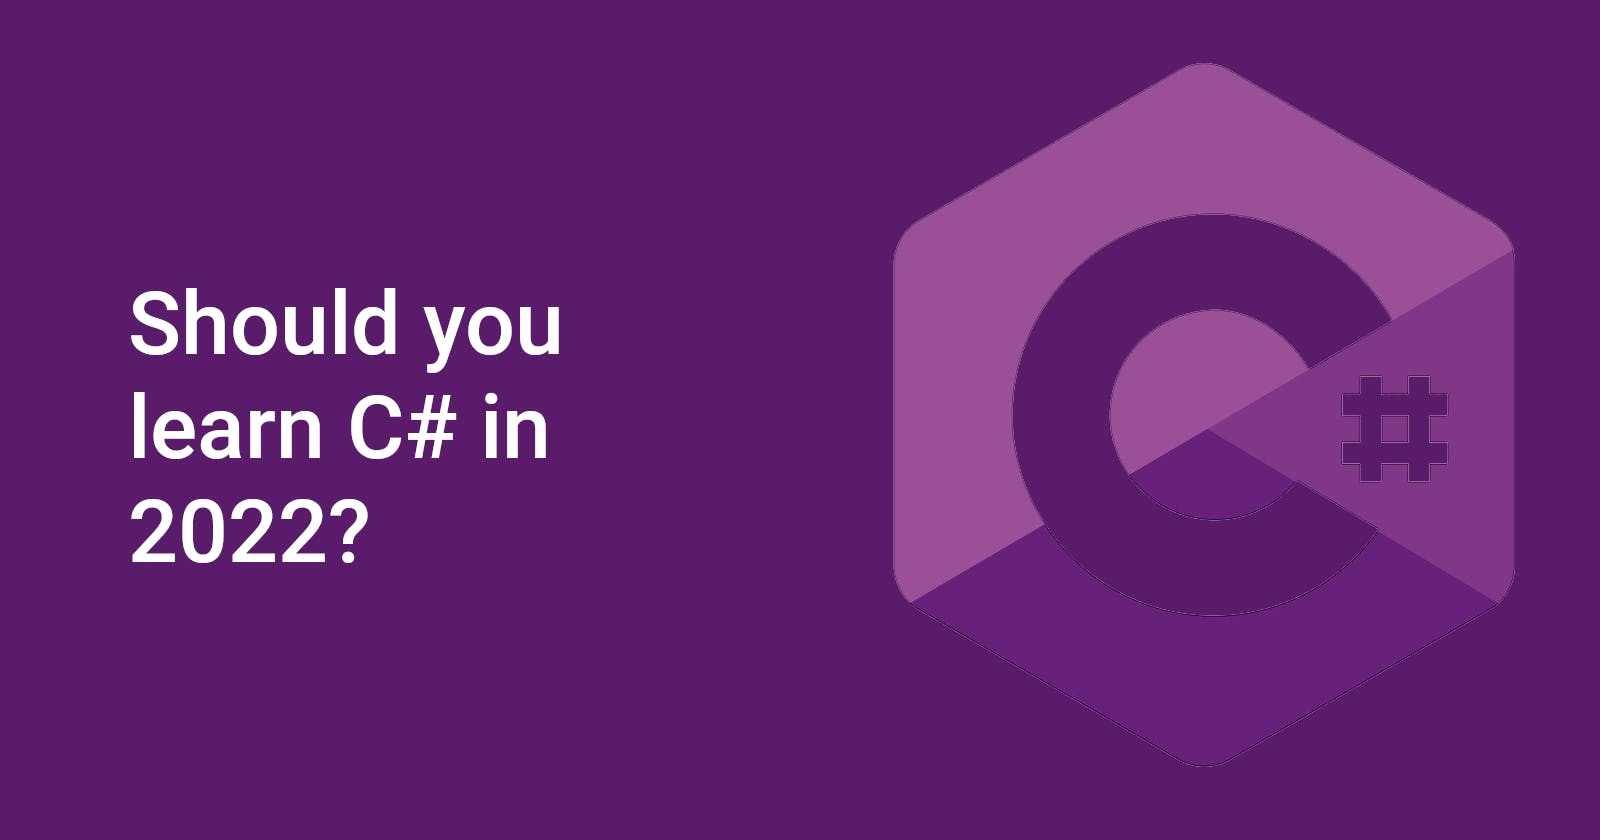 Should you learn C# in 2022?